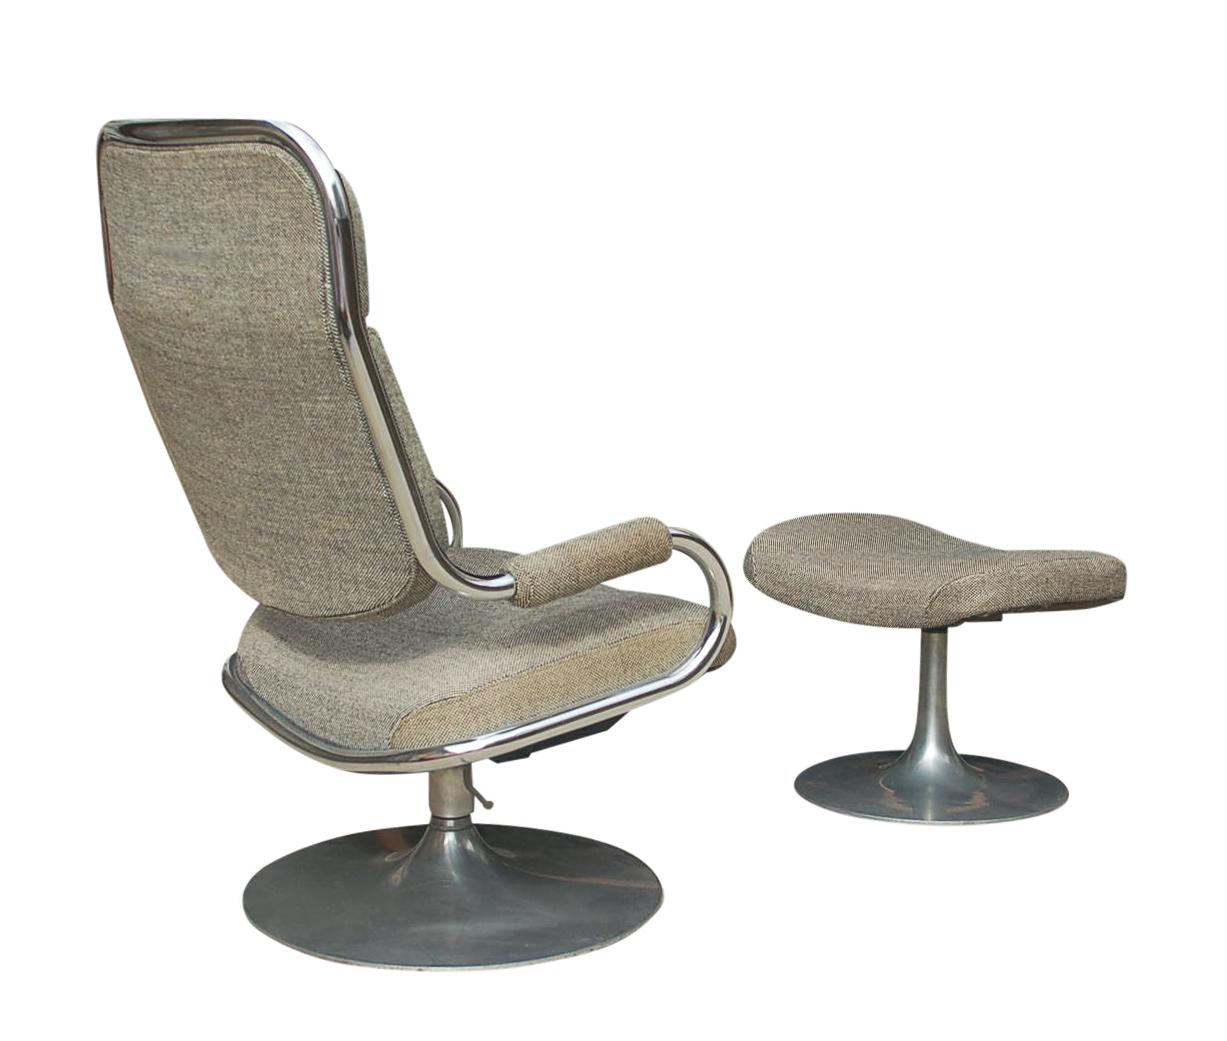 A super mod lounge chair and ottoman set staraight out of the 1970s. It features chrome tubular framing, tulip bases, swivel and reclining capability, and tweed upholstery. Fabric is soiled and needs recovering.